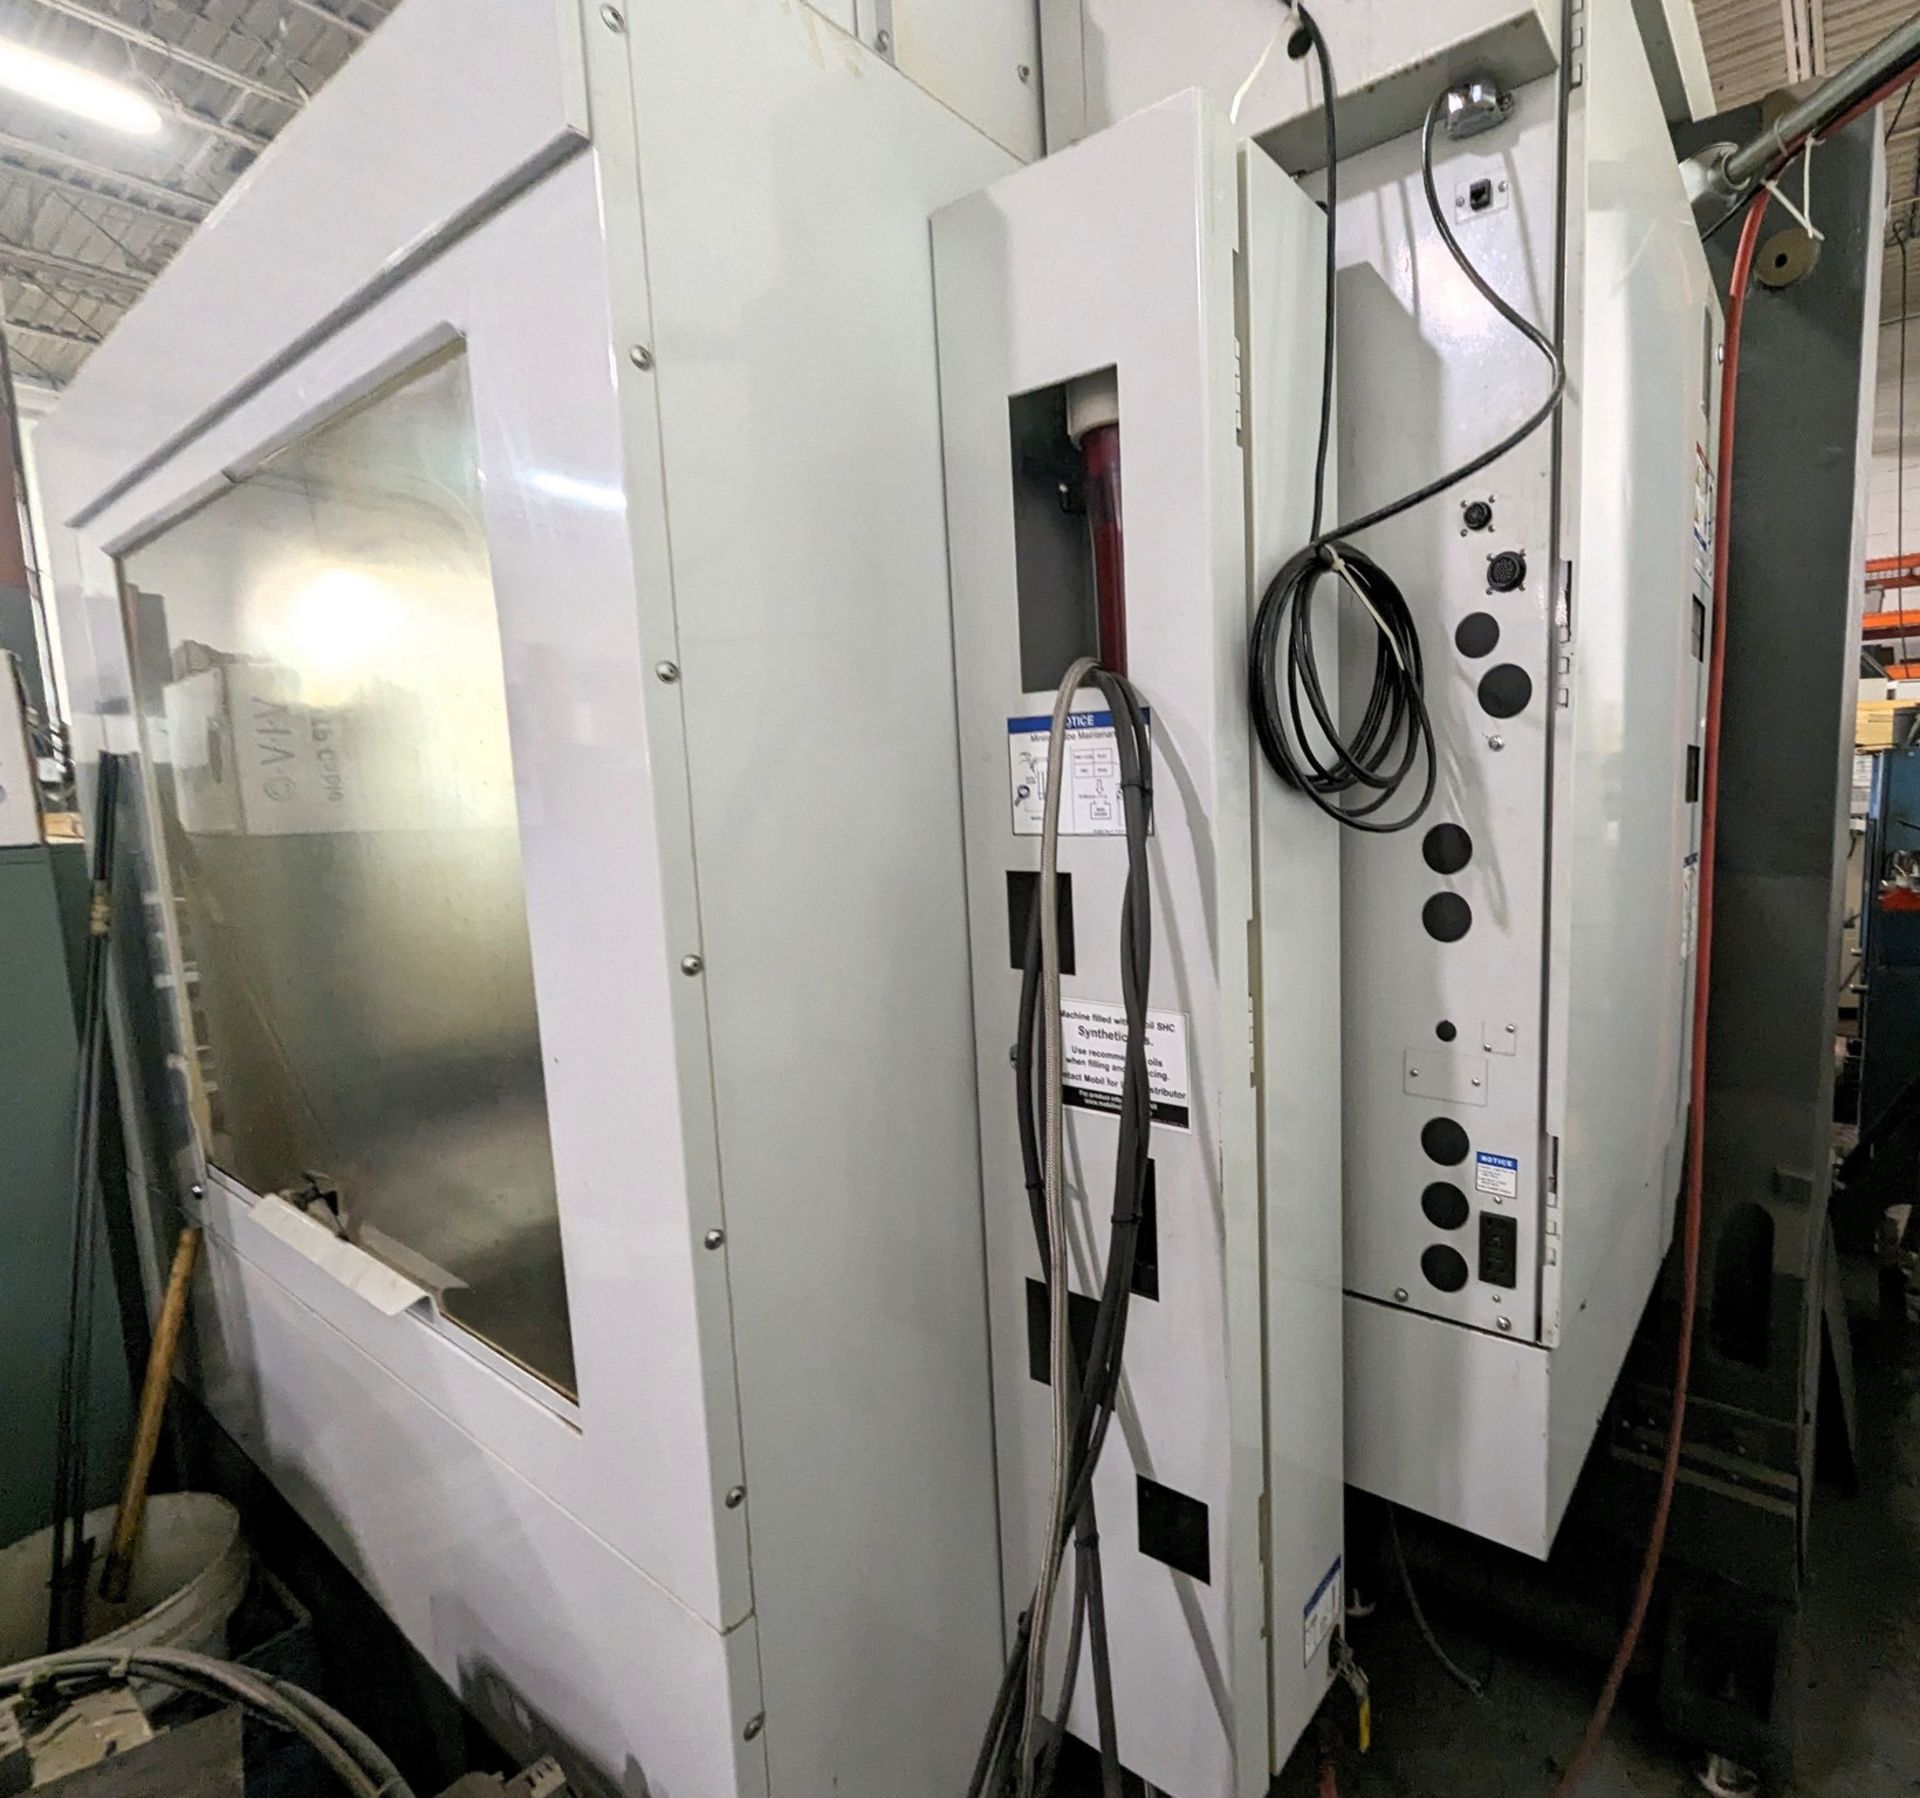 2012 HAAS VF6/40 CNC VERTICAL MACHINING CENTER, CNC CONTROL, 24” X 60” TABLE, 40 TAPER, 10,000 RPM - Image 14 of 25